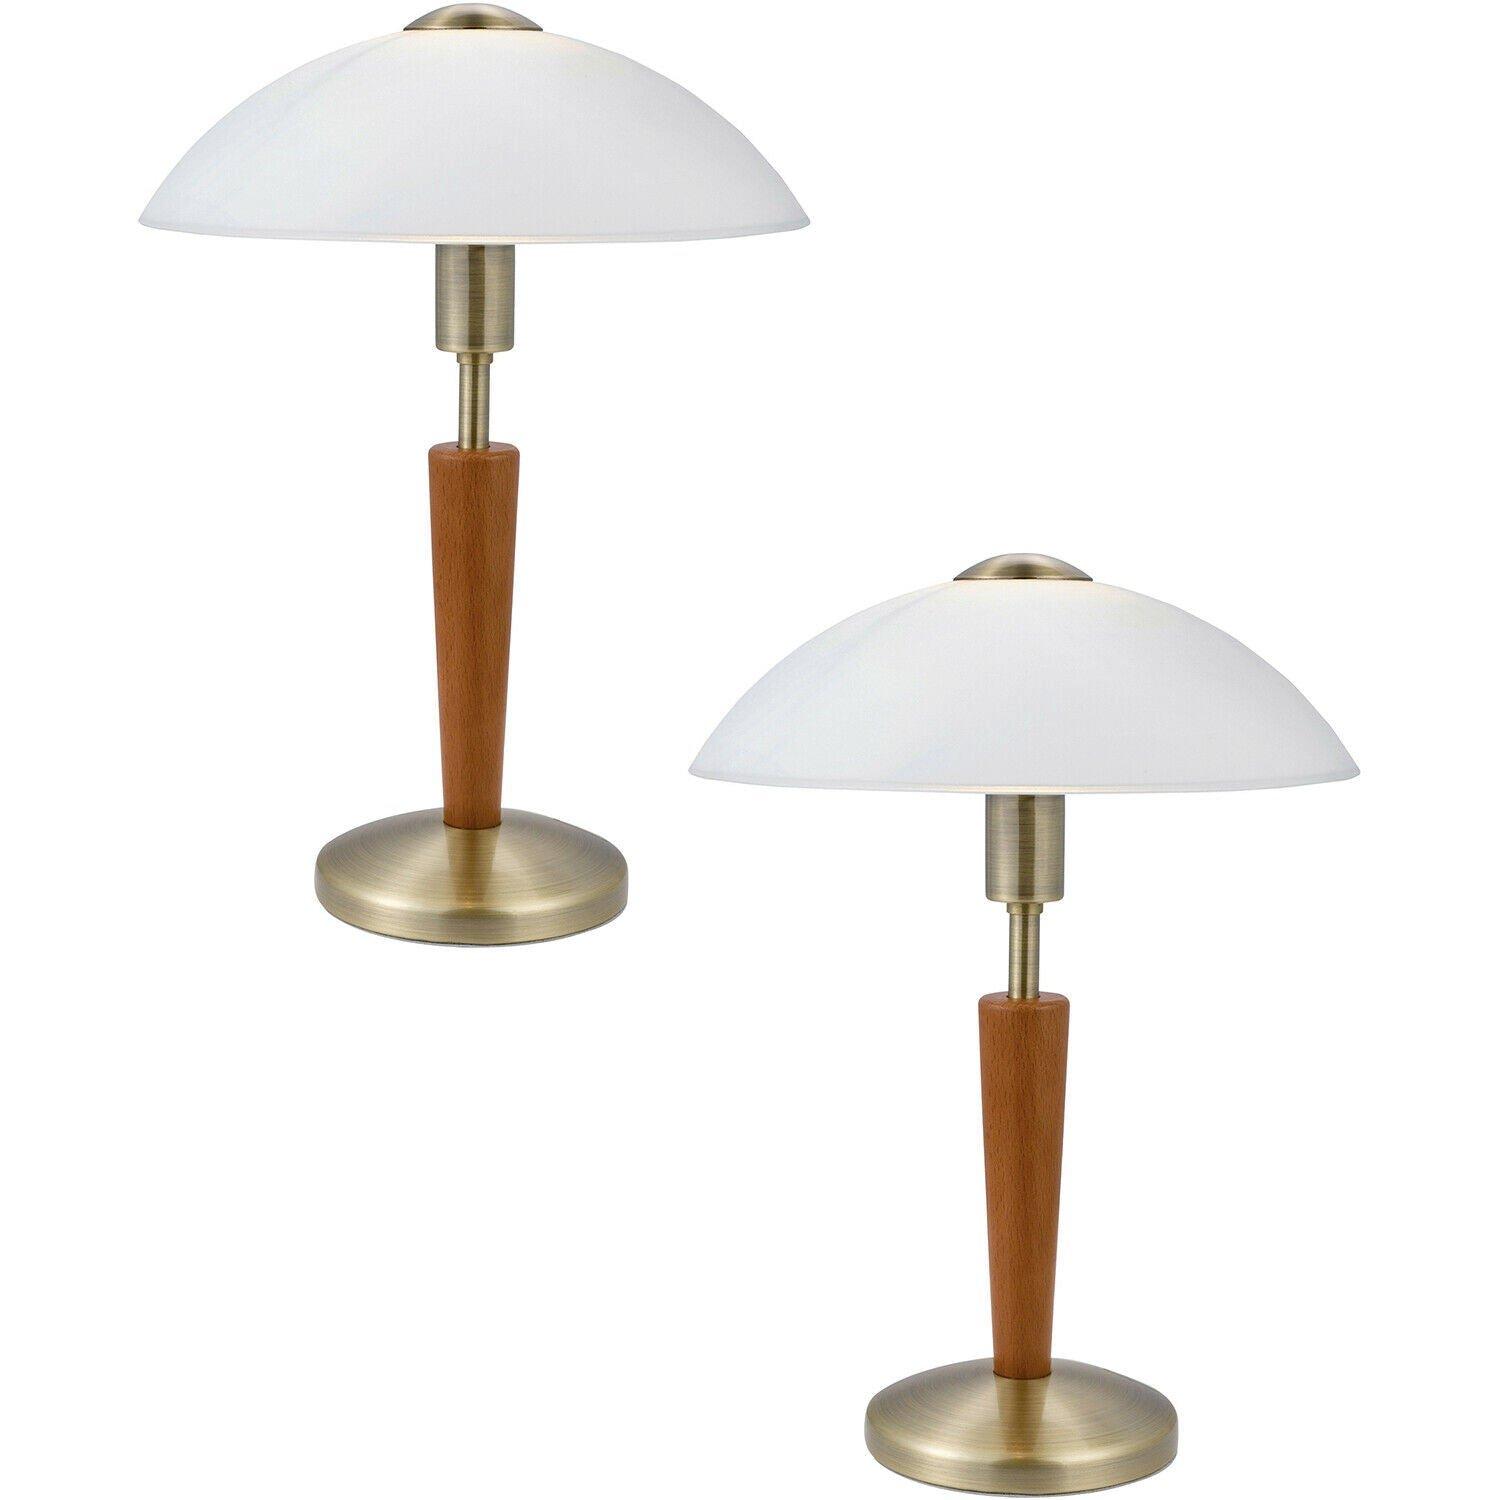 2 PACK Table Lamp Bronzed Nut Touch On & Off Shade White Satin Glass E14 1x60W